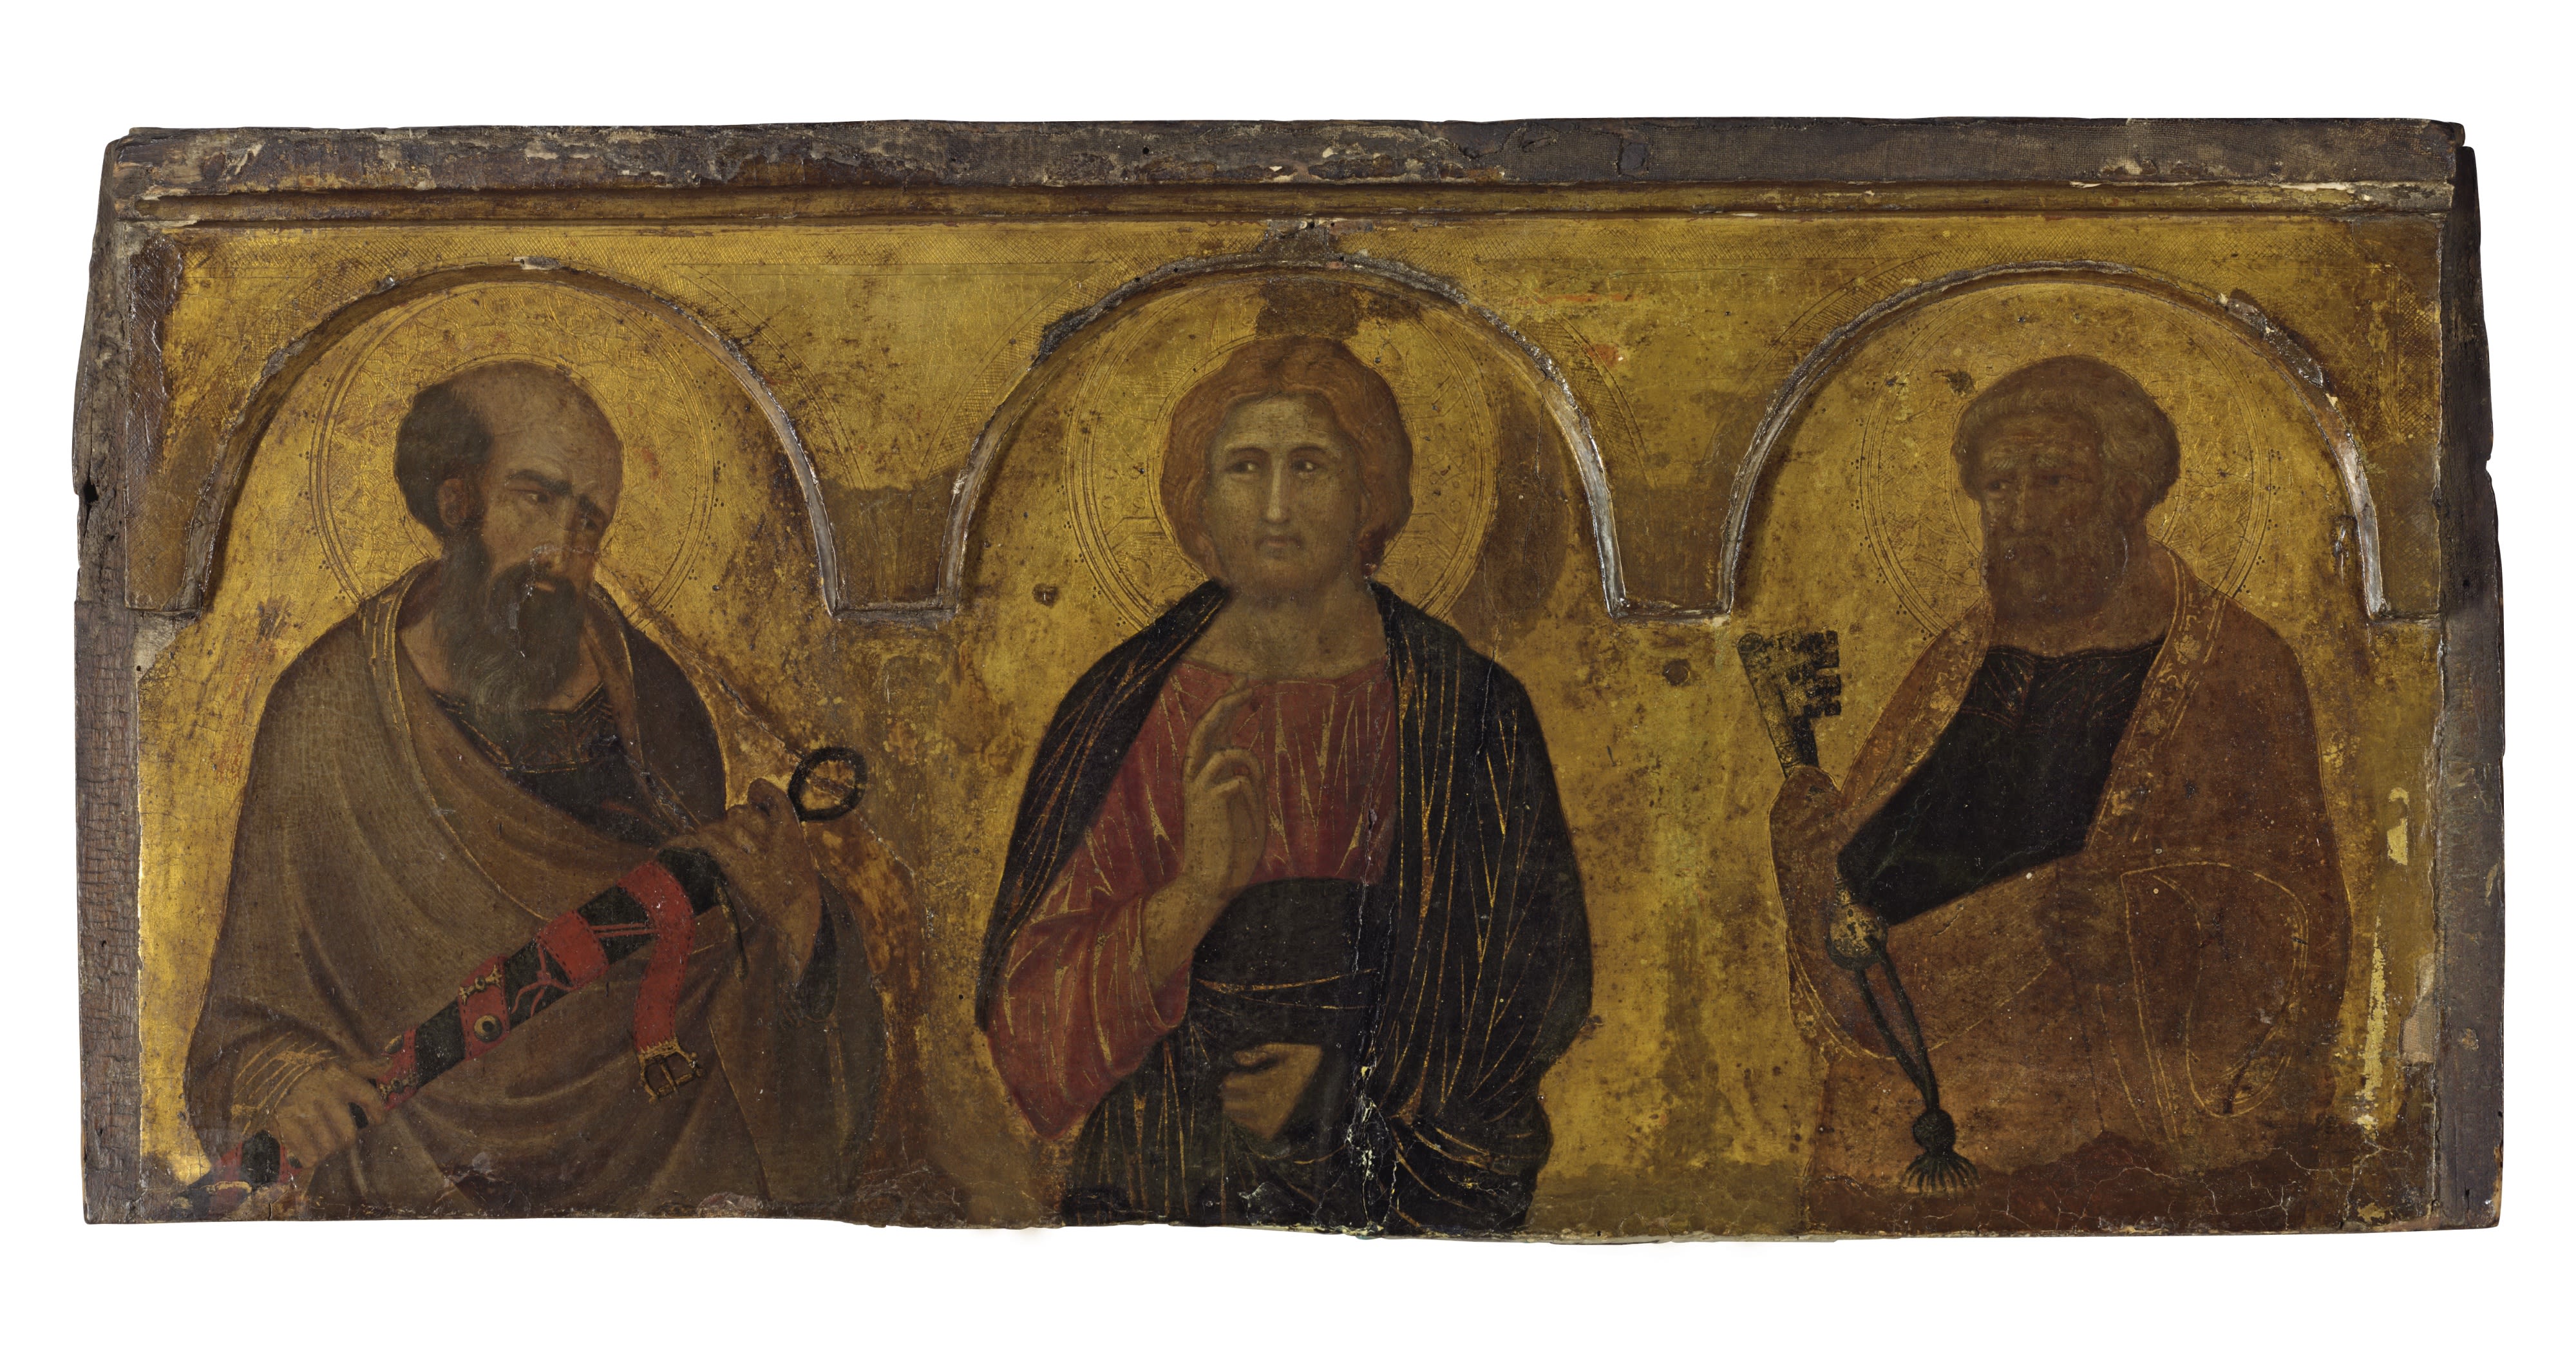 Artwork titled Christ between Saints Paul and Peter by Pietro Lorenzetti - the image has three figures with a gold background